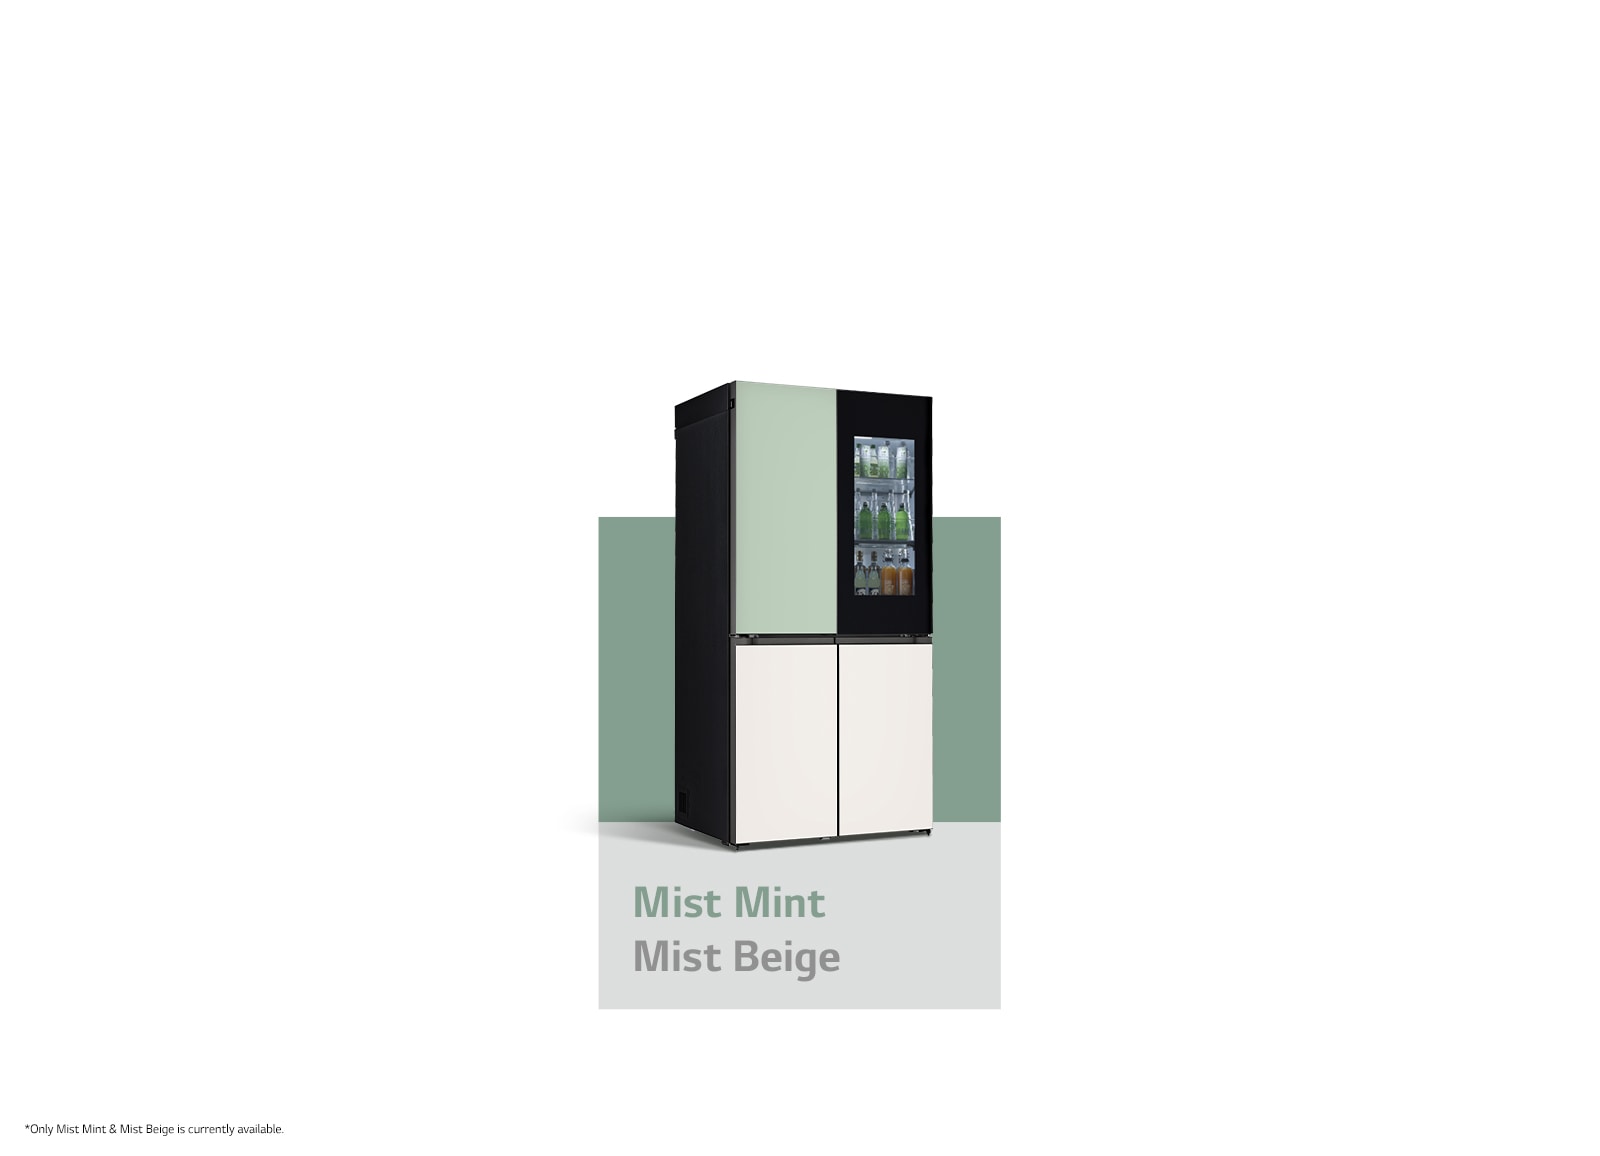 It shows mist mint&beige color LG French Door Objet Collection is placed in a dark-tone modern kitchen.